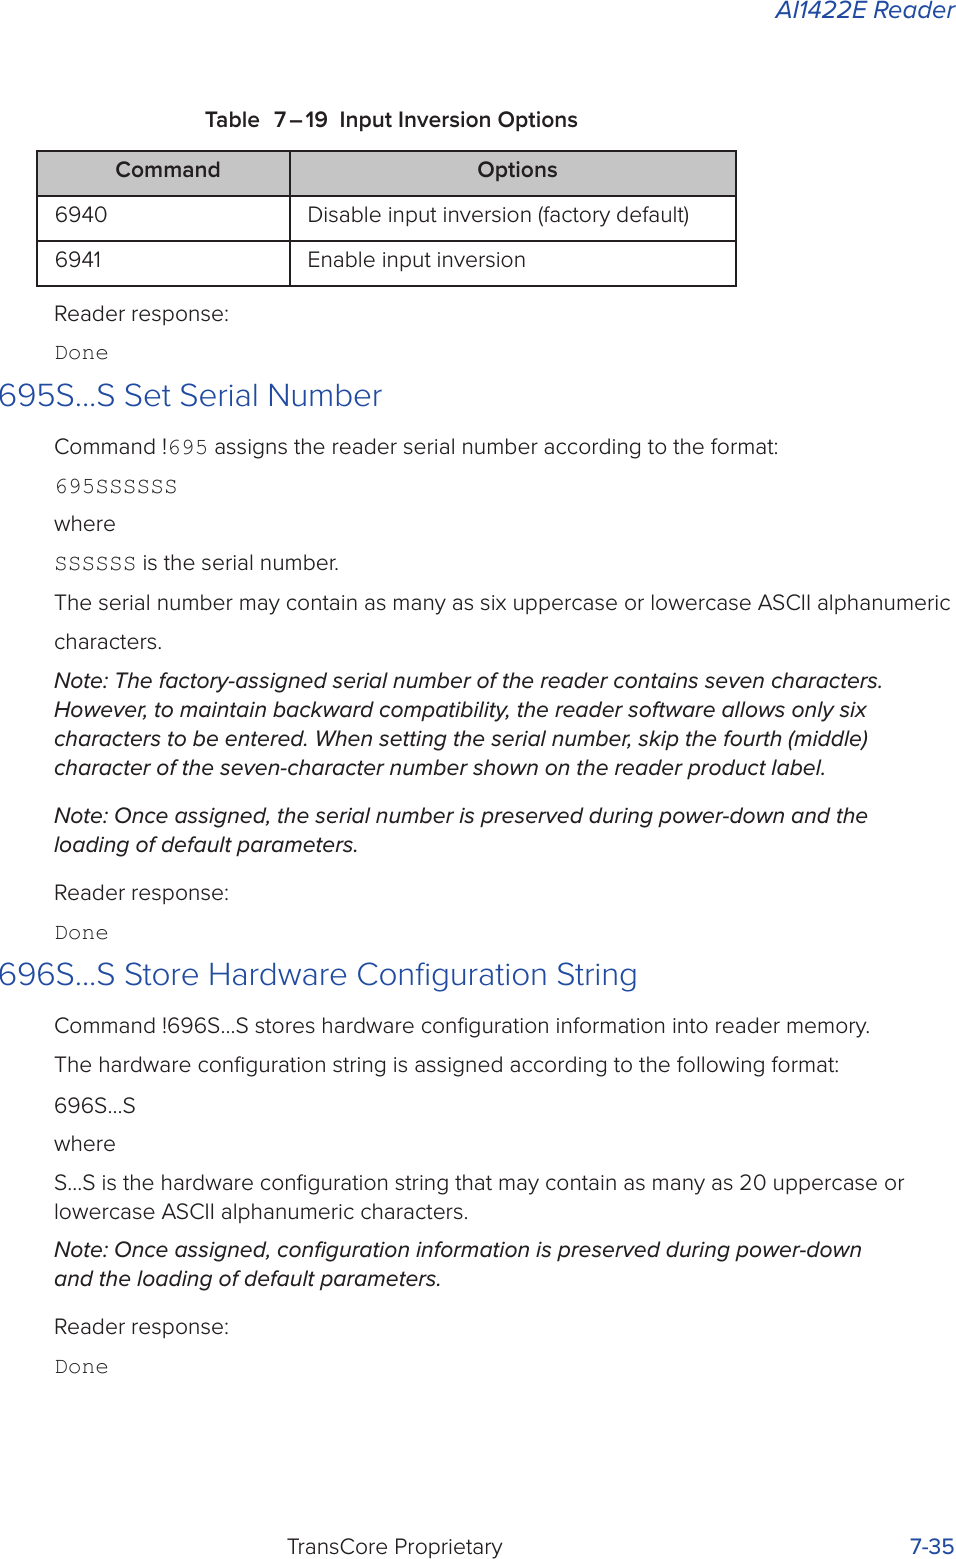 AI1422E ReaderTransCore Proprietary 7-35Table 7 – 19 Input Inversion OptionsReader response:Done695S...S Set Serial NumberCommand !695 assigns the reader serial number according to the format:695SSSSSSwhereSSSSSS is the serial number.The serial number may contain as many as six uppercase or lowercase ASCII alphanumeric characters.Note: The factory-assigned serial number of the reader contains seven characters. However, to maintain backward compatibility, the reader software allows only six characters to be entered. When setting the serial number, skip the fourth (middle) character of the seven-character number shown on the reader product label.Note: Once assigned, the serial number is preserved during power-down and the loading of default parameters.Reader response:Done696S...S Store Hardware Conﬁguration StringCommand !696S...S stores hardware conﬁguration information into reader memory.The hardware conﬁguration string is assigned according to the following format:696S...SwhereS...S is the hardware conﬁguration string that may contain as many as 20 uppercase or lowercase ASCII alphanumeric characters.Note: Once assigned, conﬁguration information is preserved during power-down and the loading of default parameters.Reader response:DoneCommand Options6940 Disable input inversion (factory default)6941 Enable input inversion